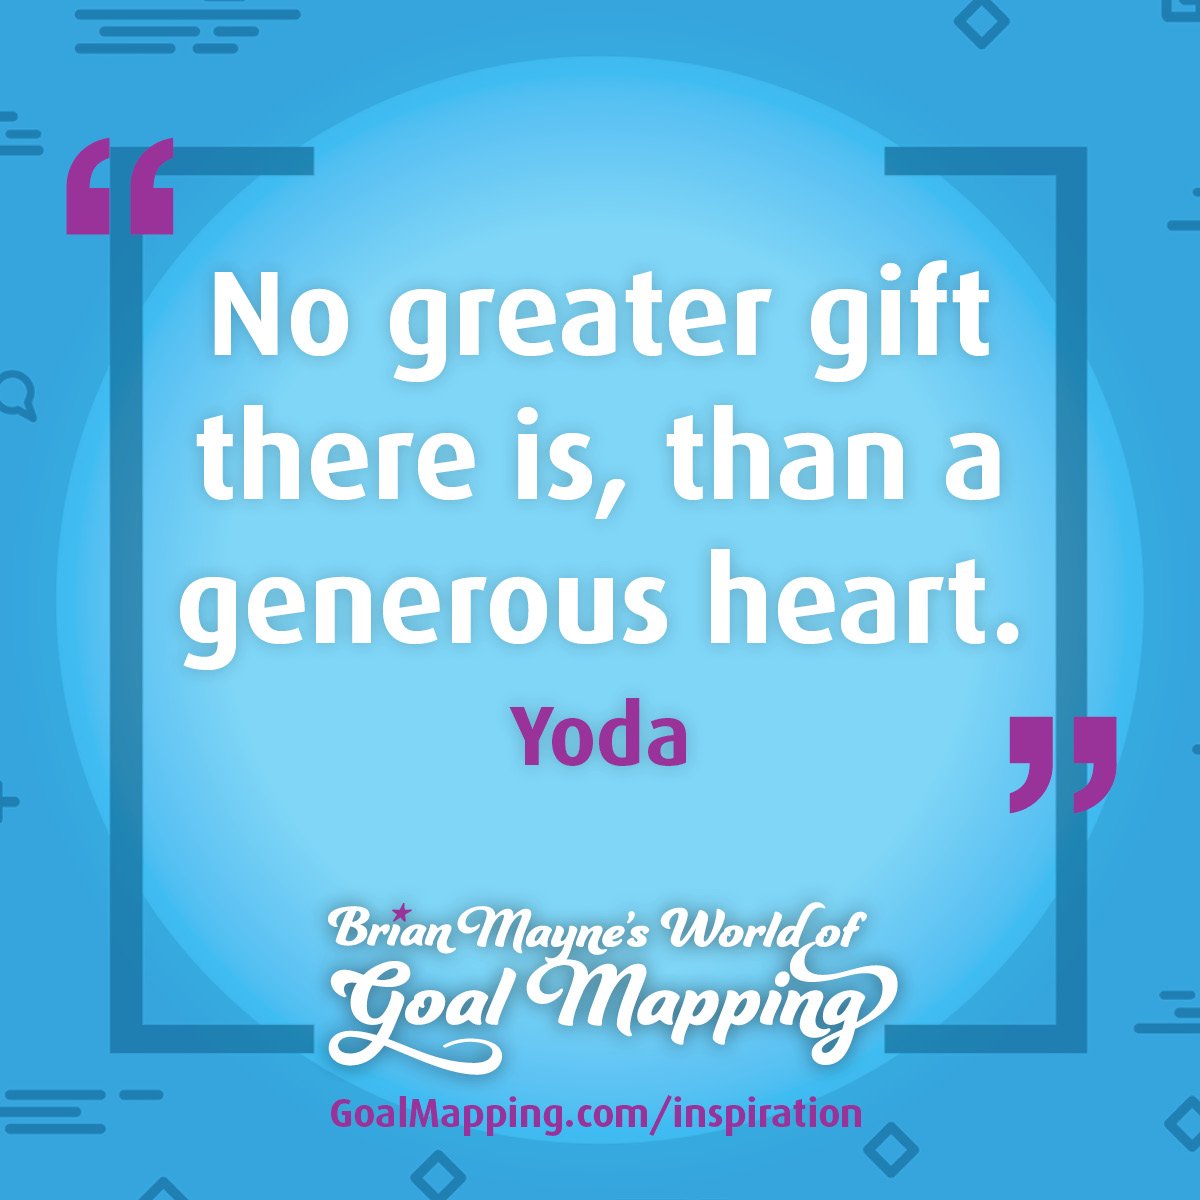 "No greater gift there is, than a generous heart." Yoda